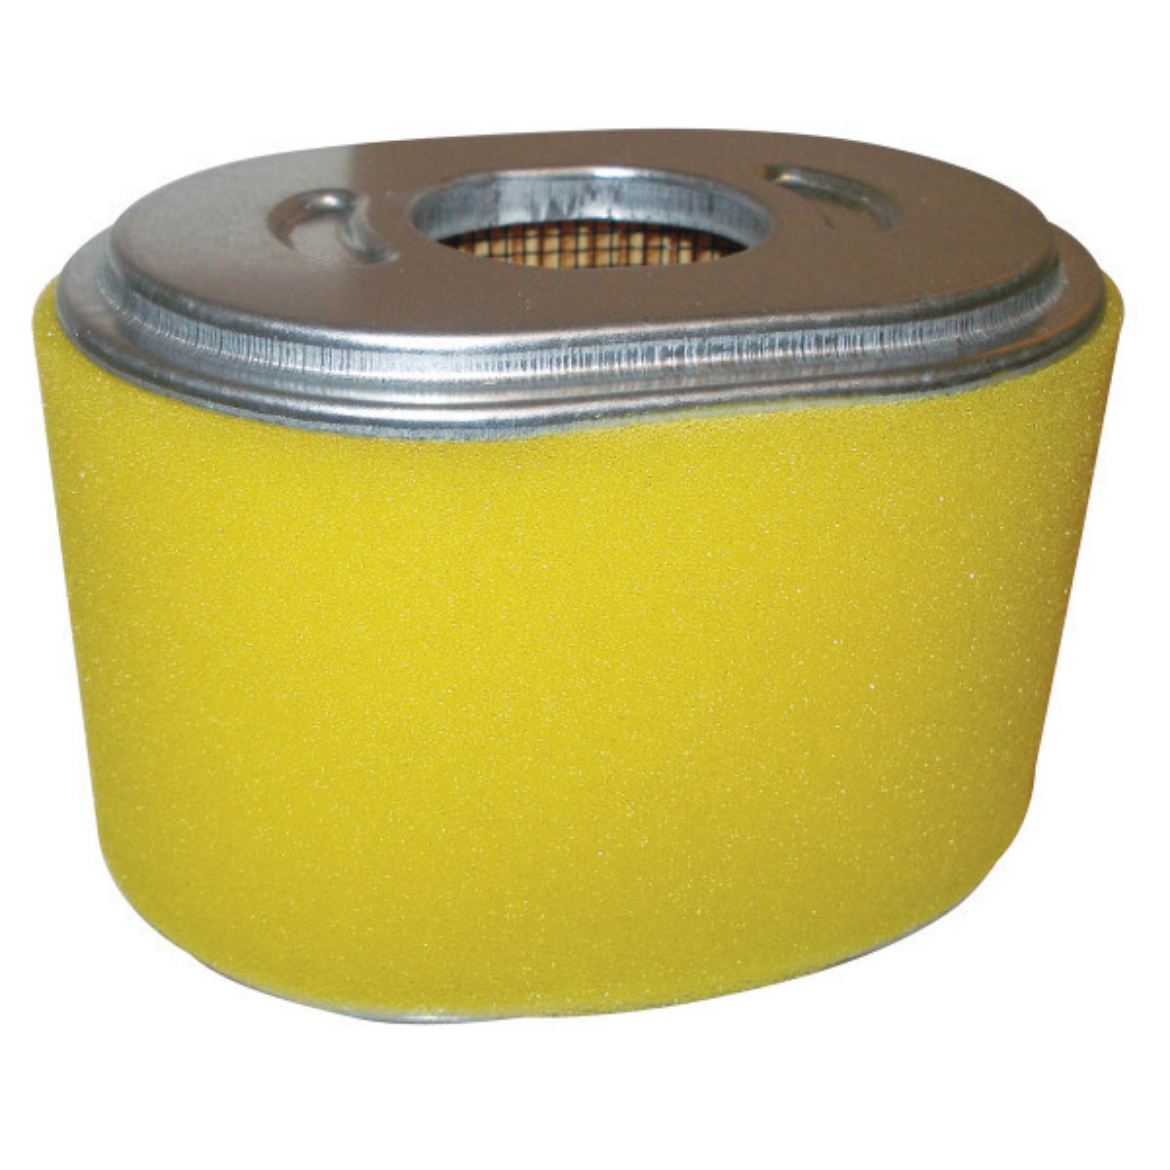 Picture of HONDA OVAL AIR FILTER - TO SUITS GX200 HONDA ENGINE